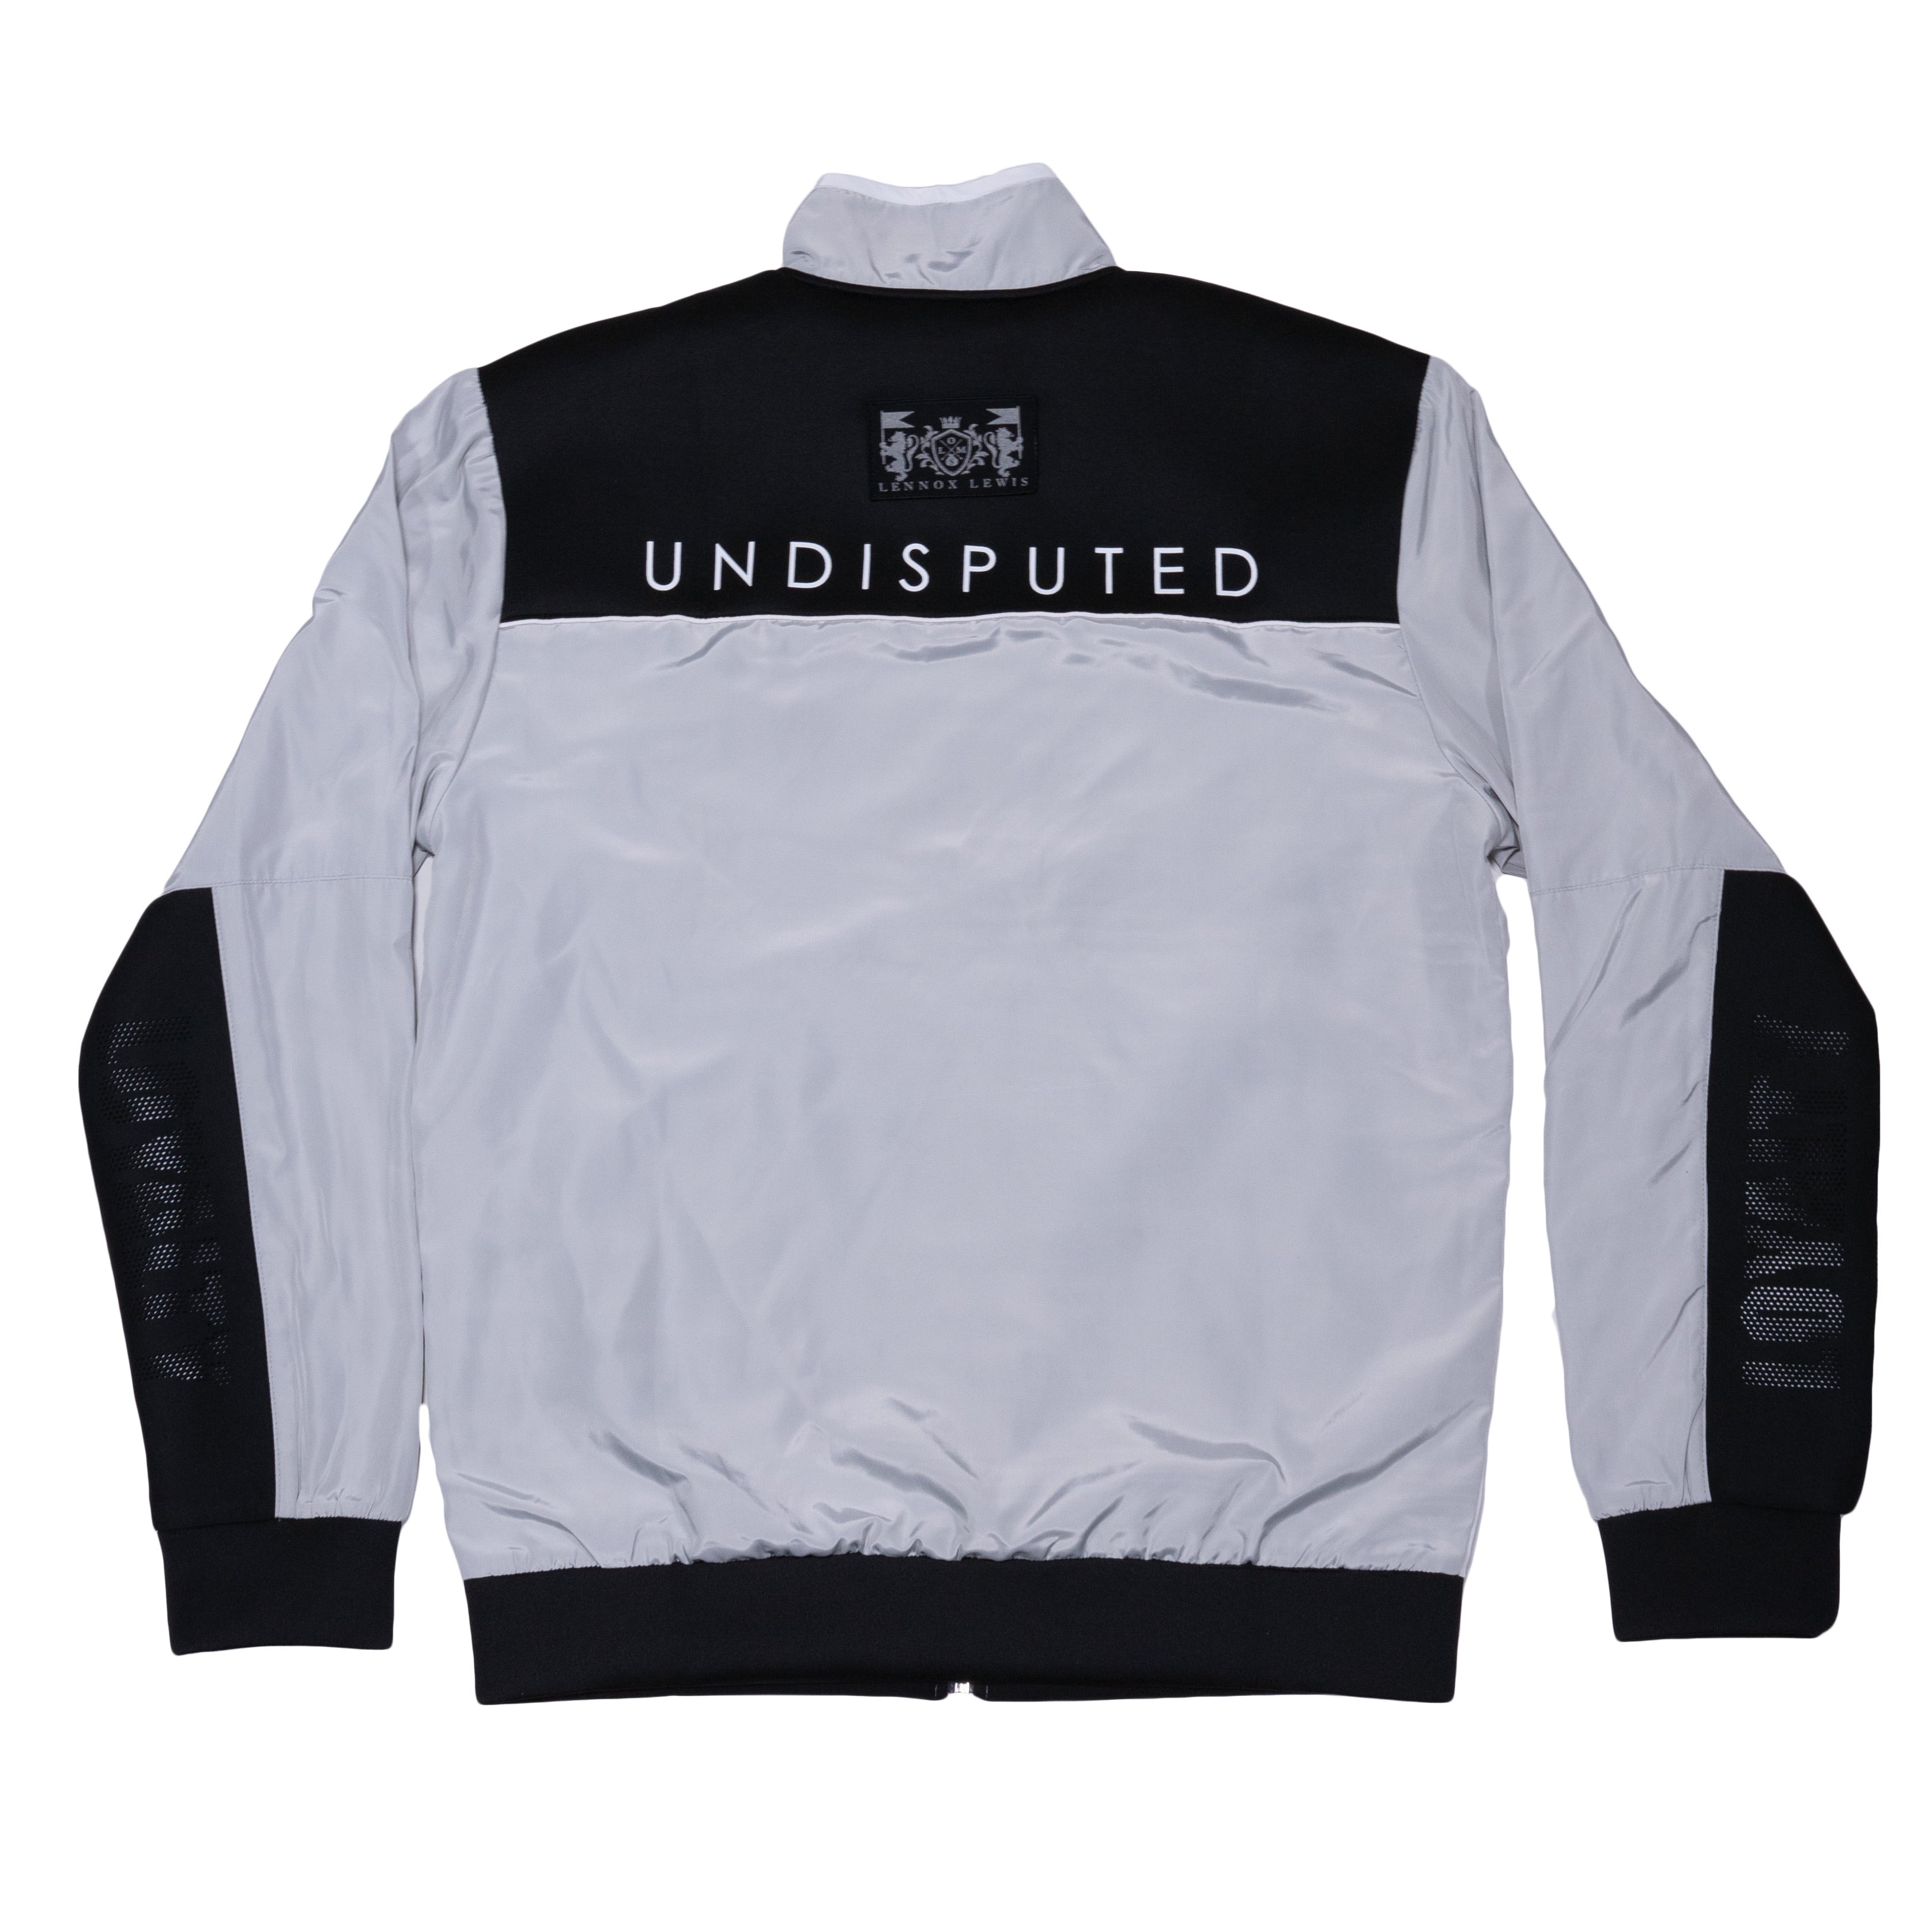 “UNDISPUTED” TRACKSUITS limited edition